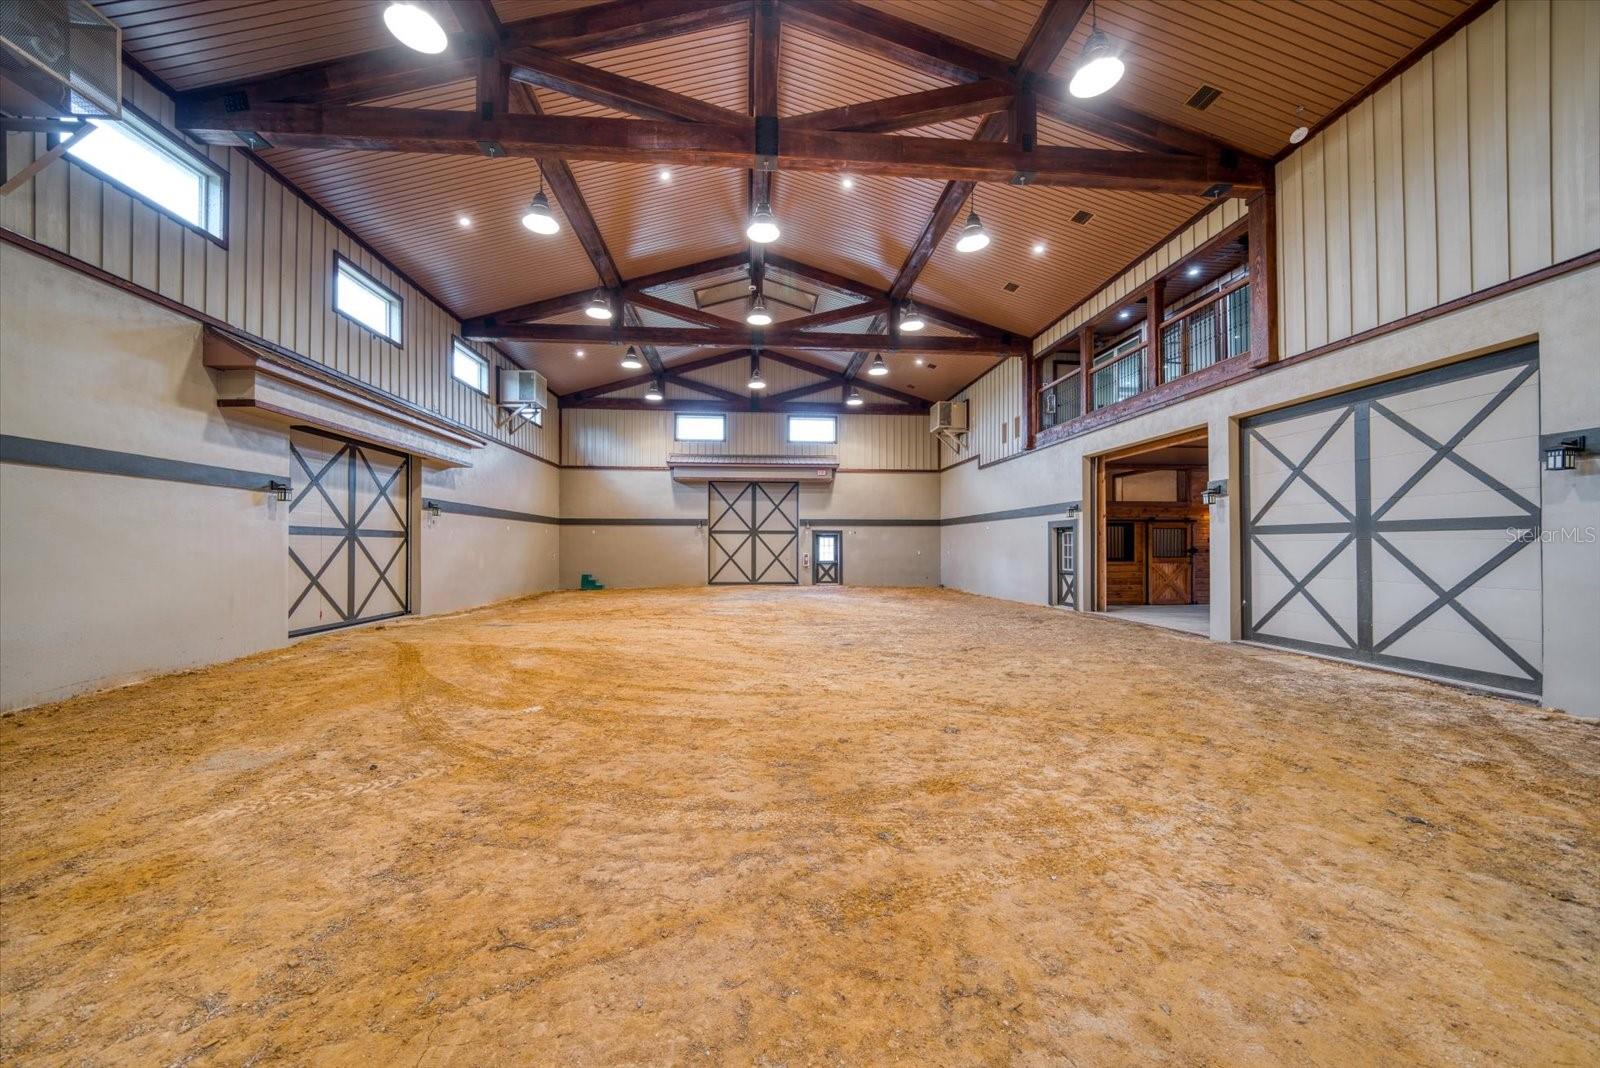 Covered Arena - View of the Barn, Catering/Garage Area, and Balcony for Living Quarters